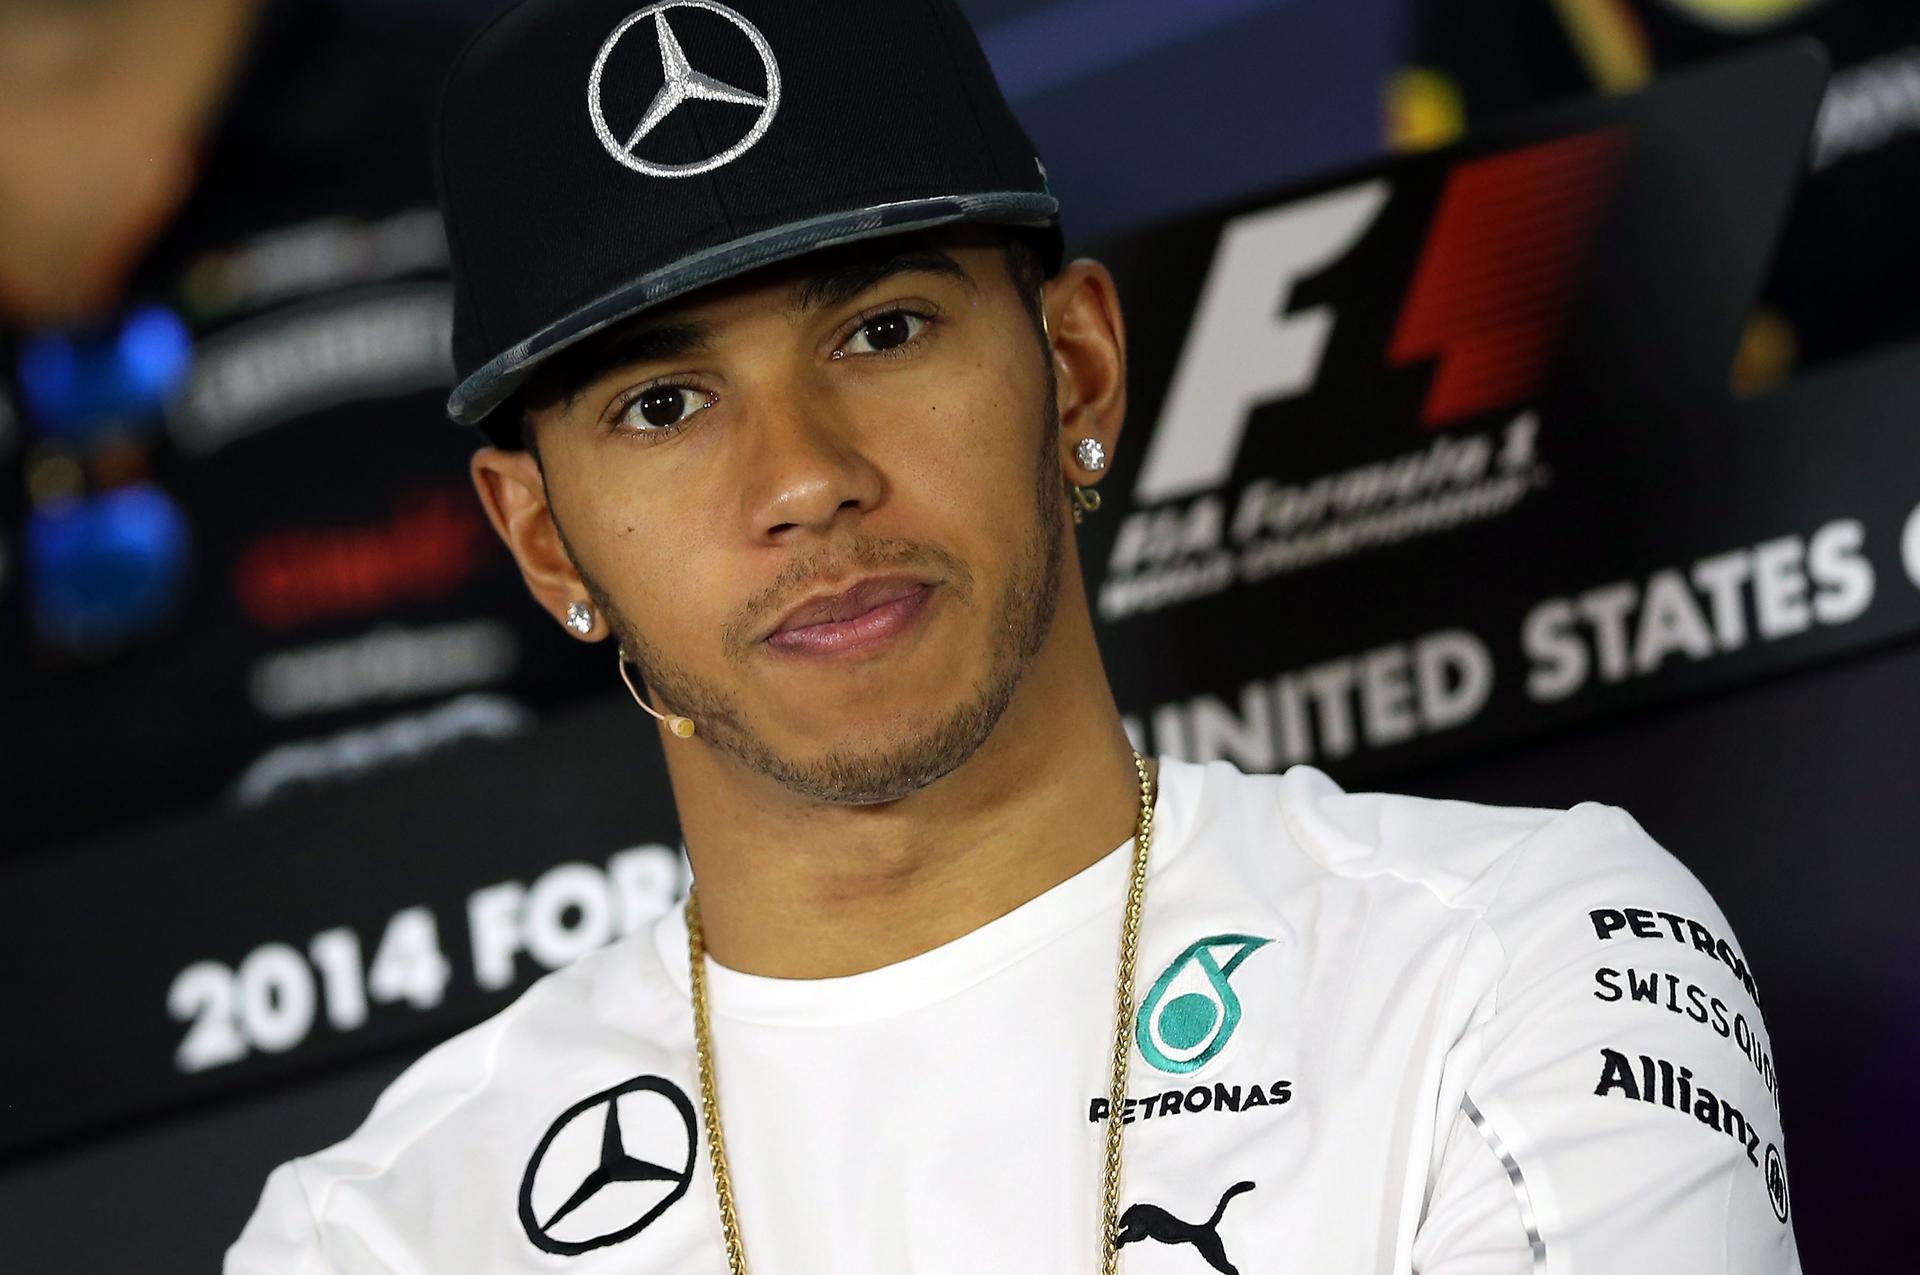 Lewis Hamilton leads the drivers' championship with three rounds to go. Photo: EPA